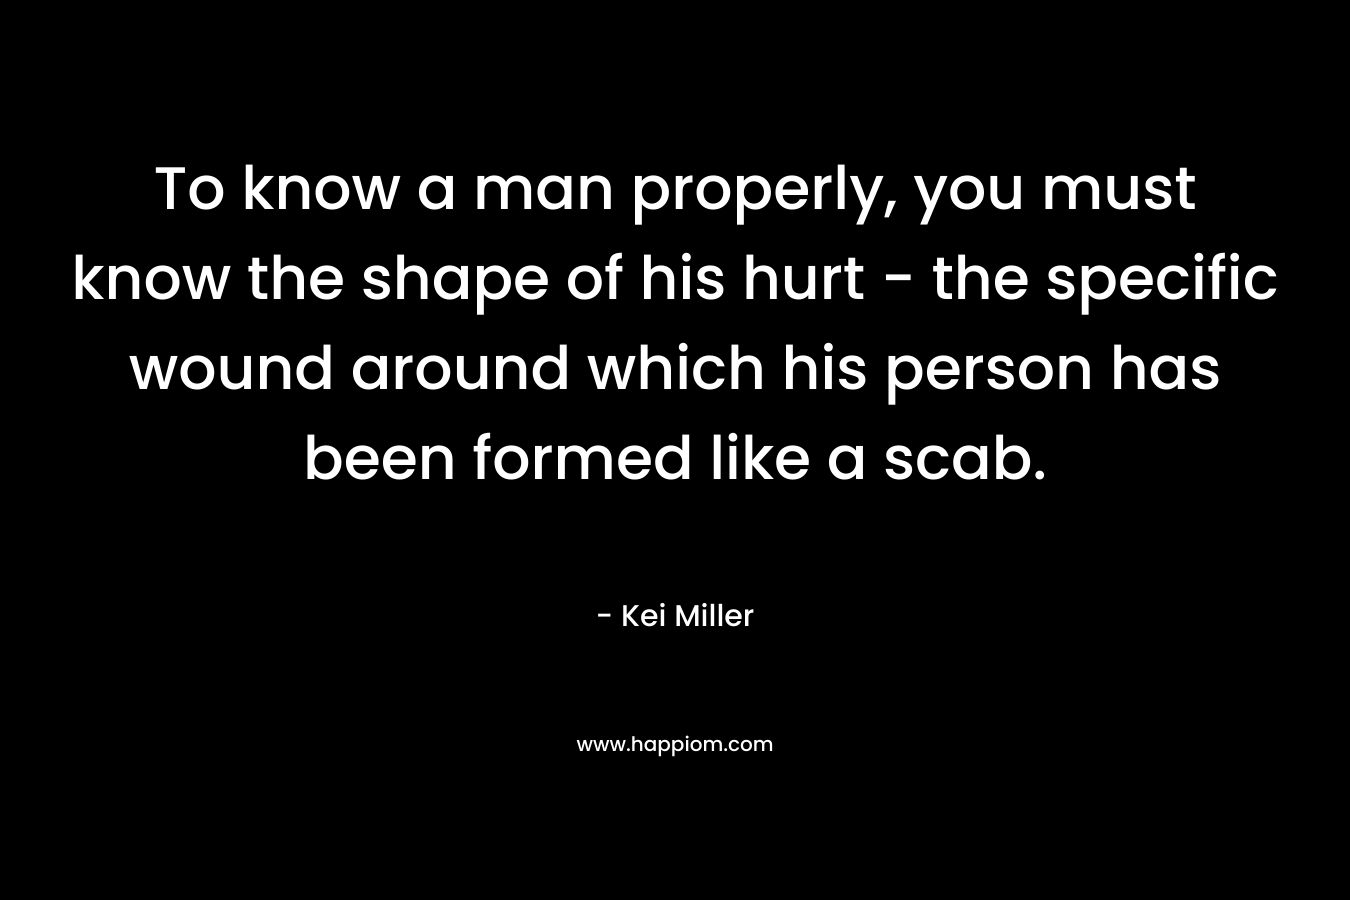 To know a man properly, you must know the shape of his hurt – the specific wound around which his person has been formed like a scab. – Kei Miller